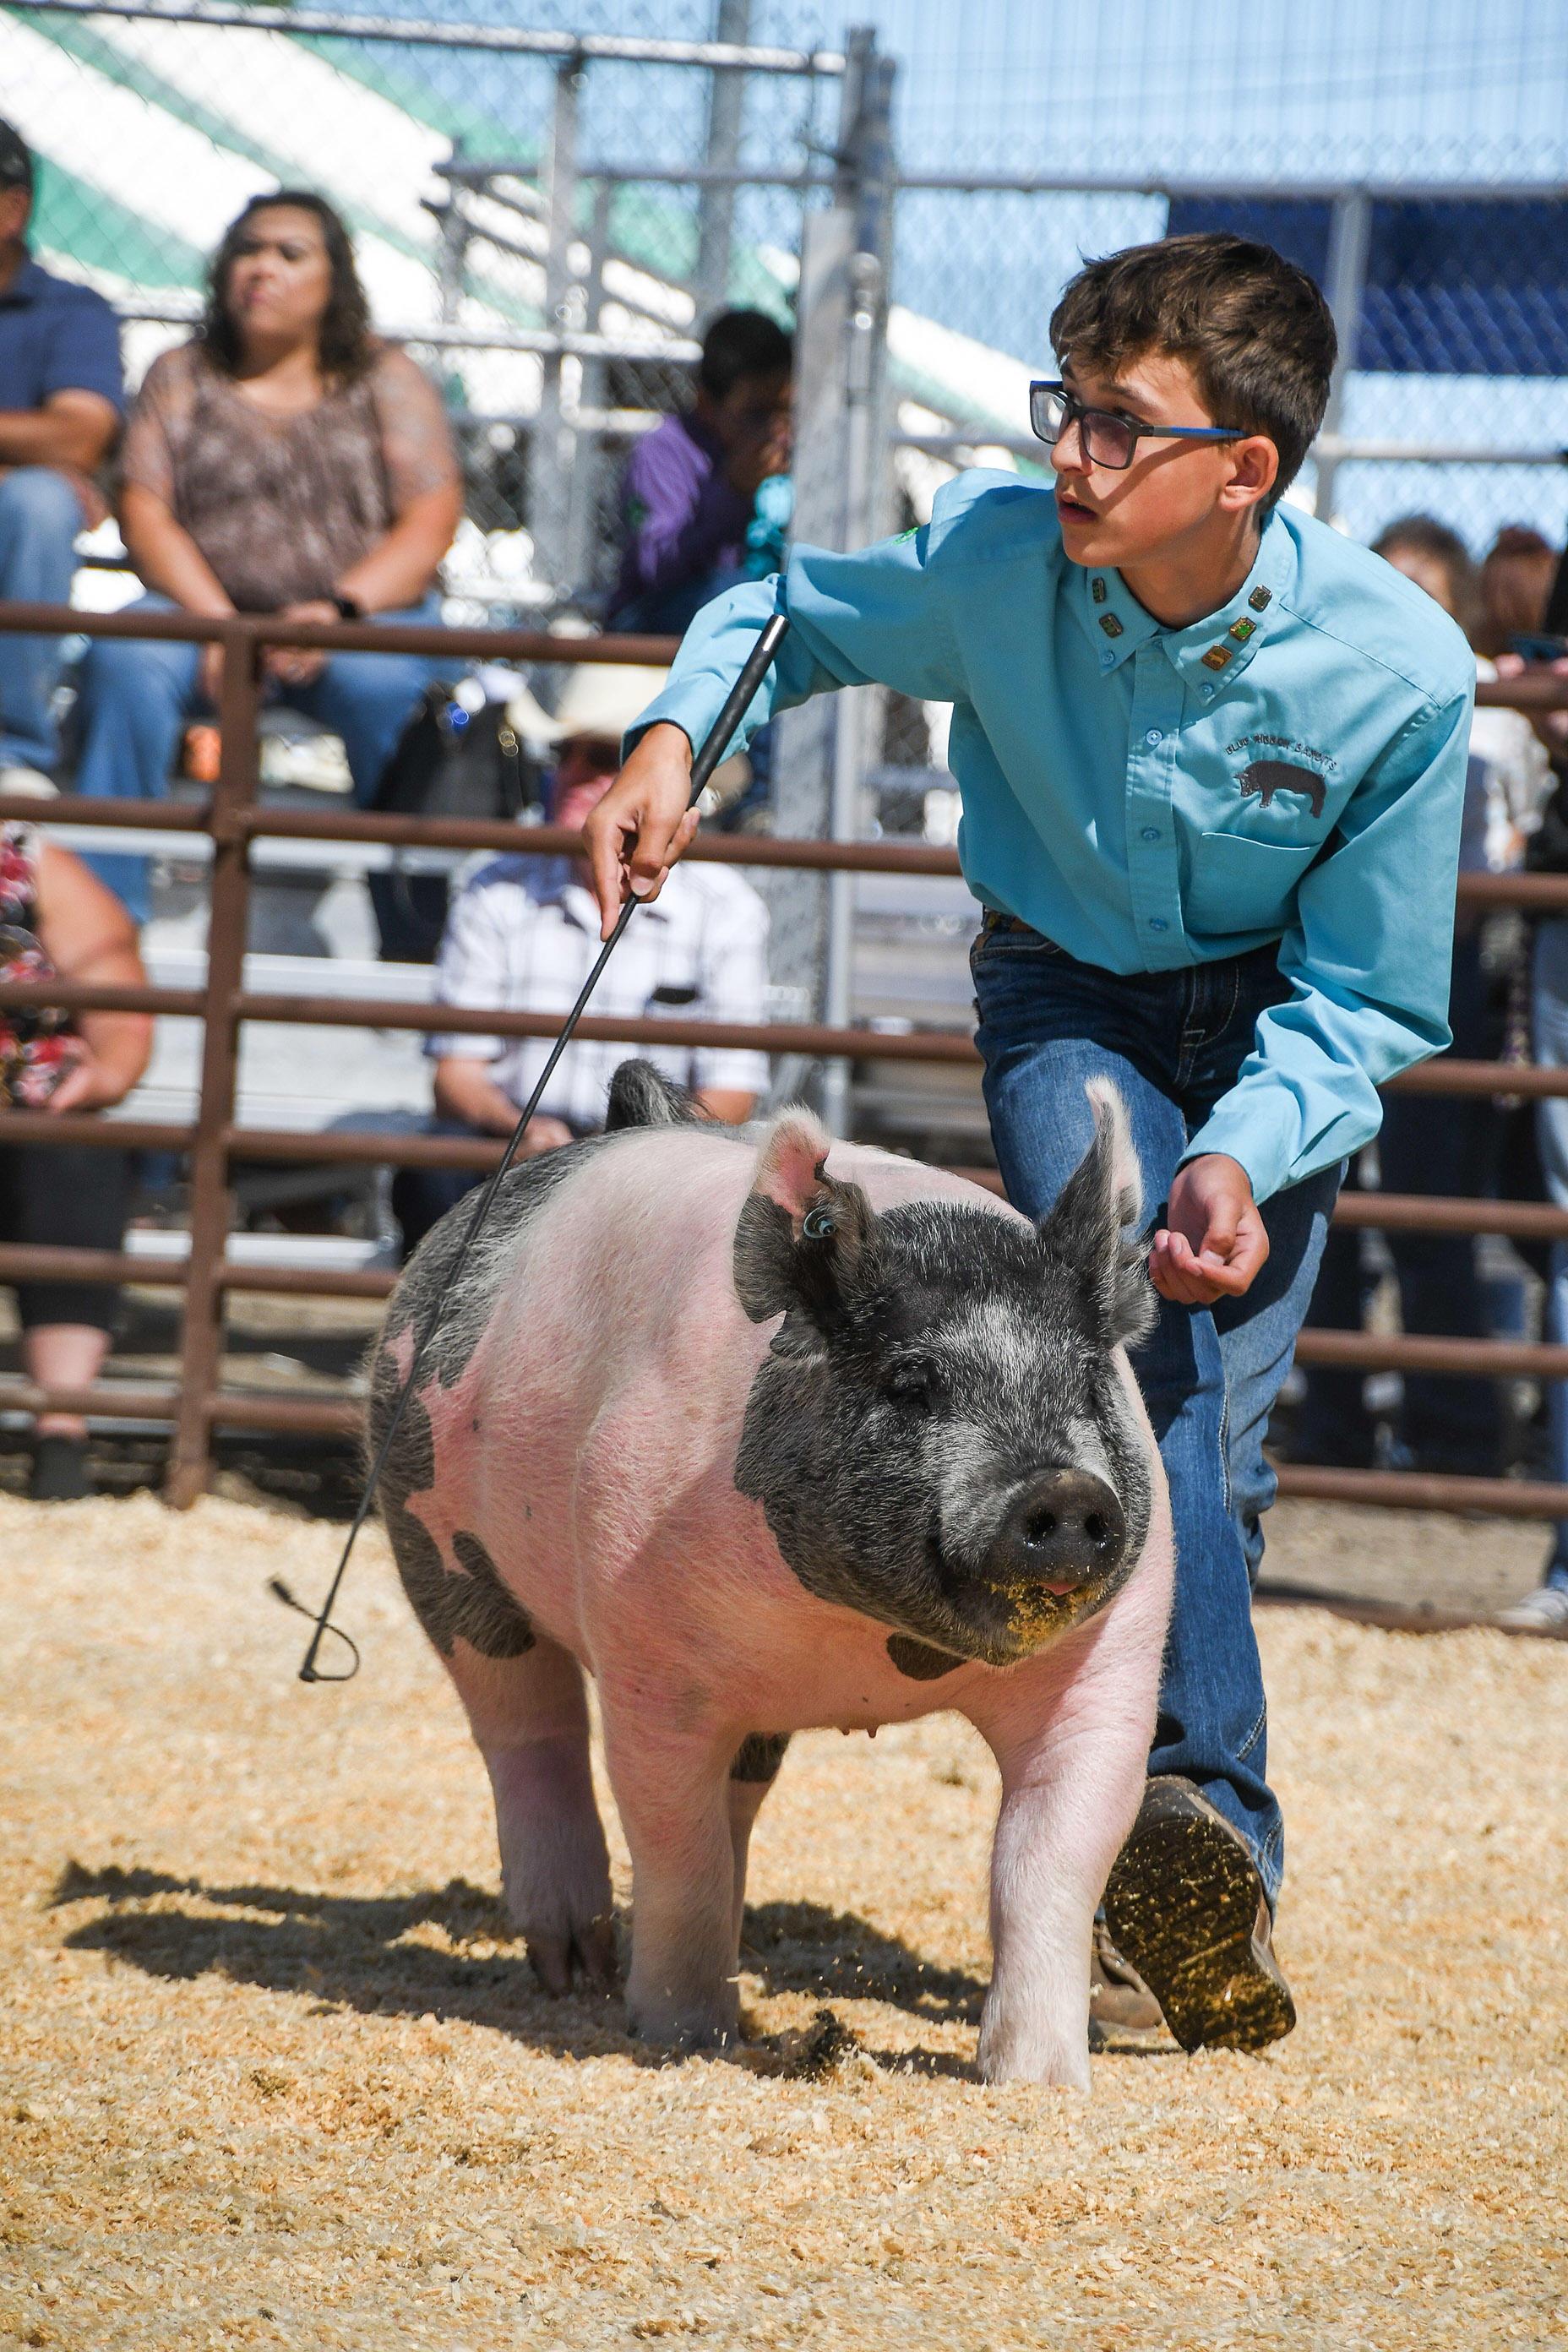 4-H youth showing swine in a ring